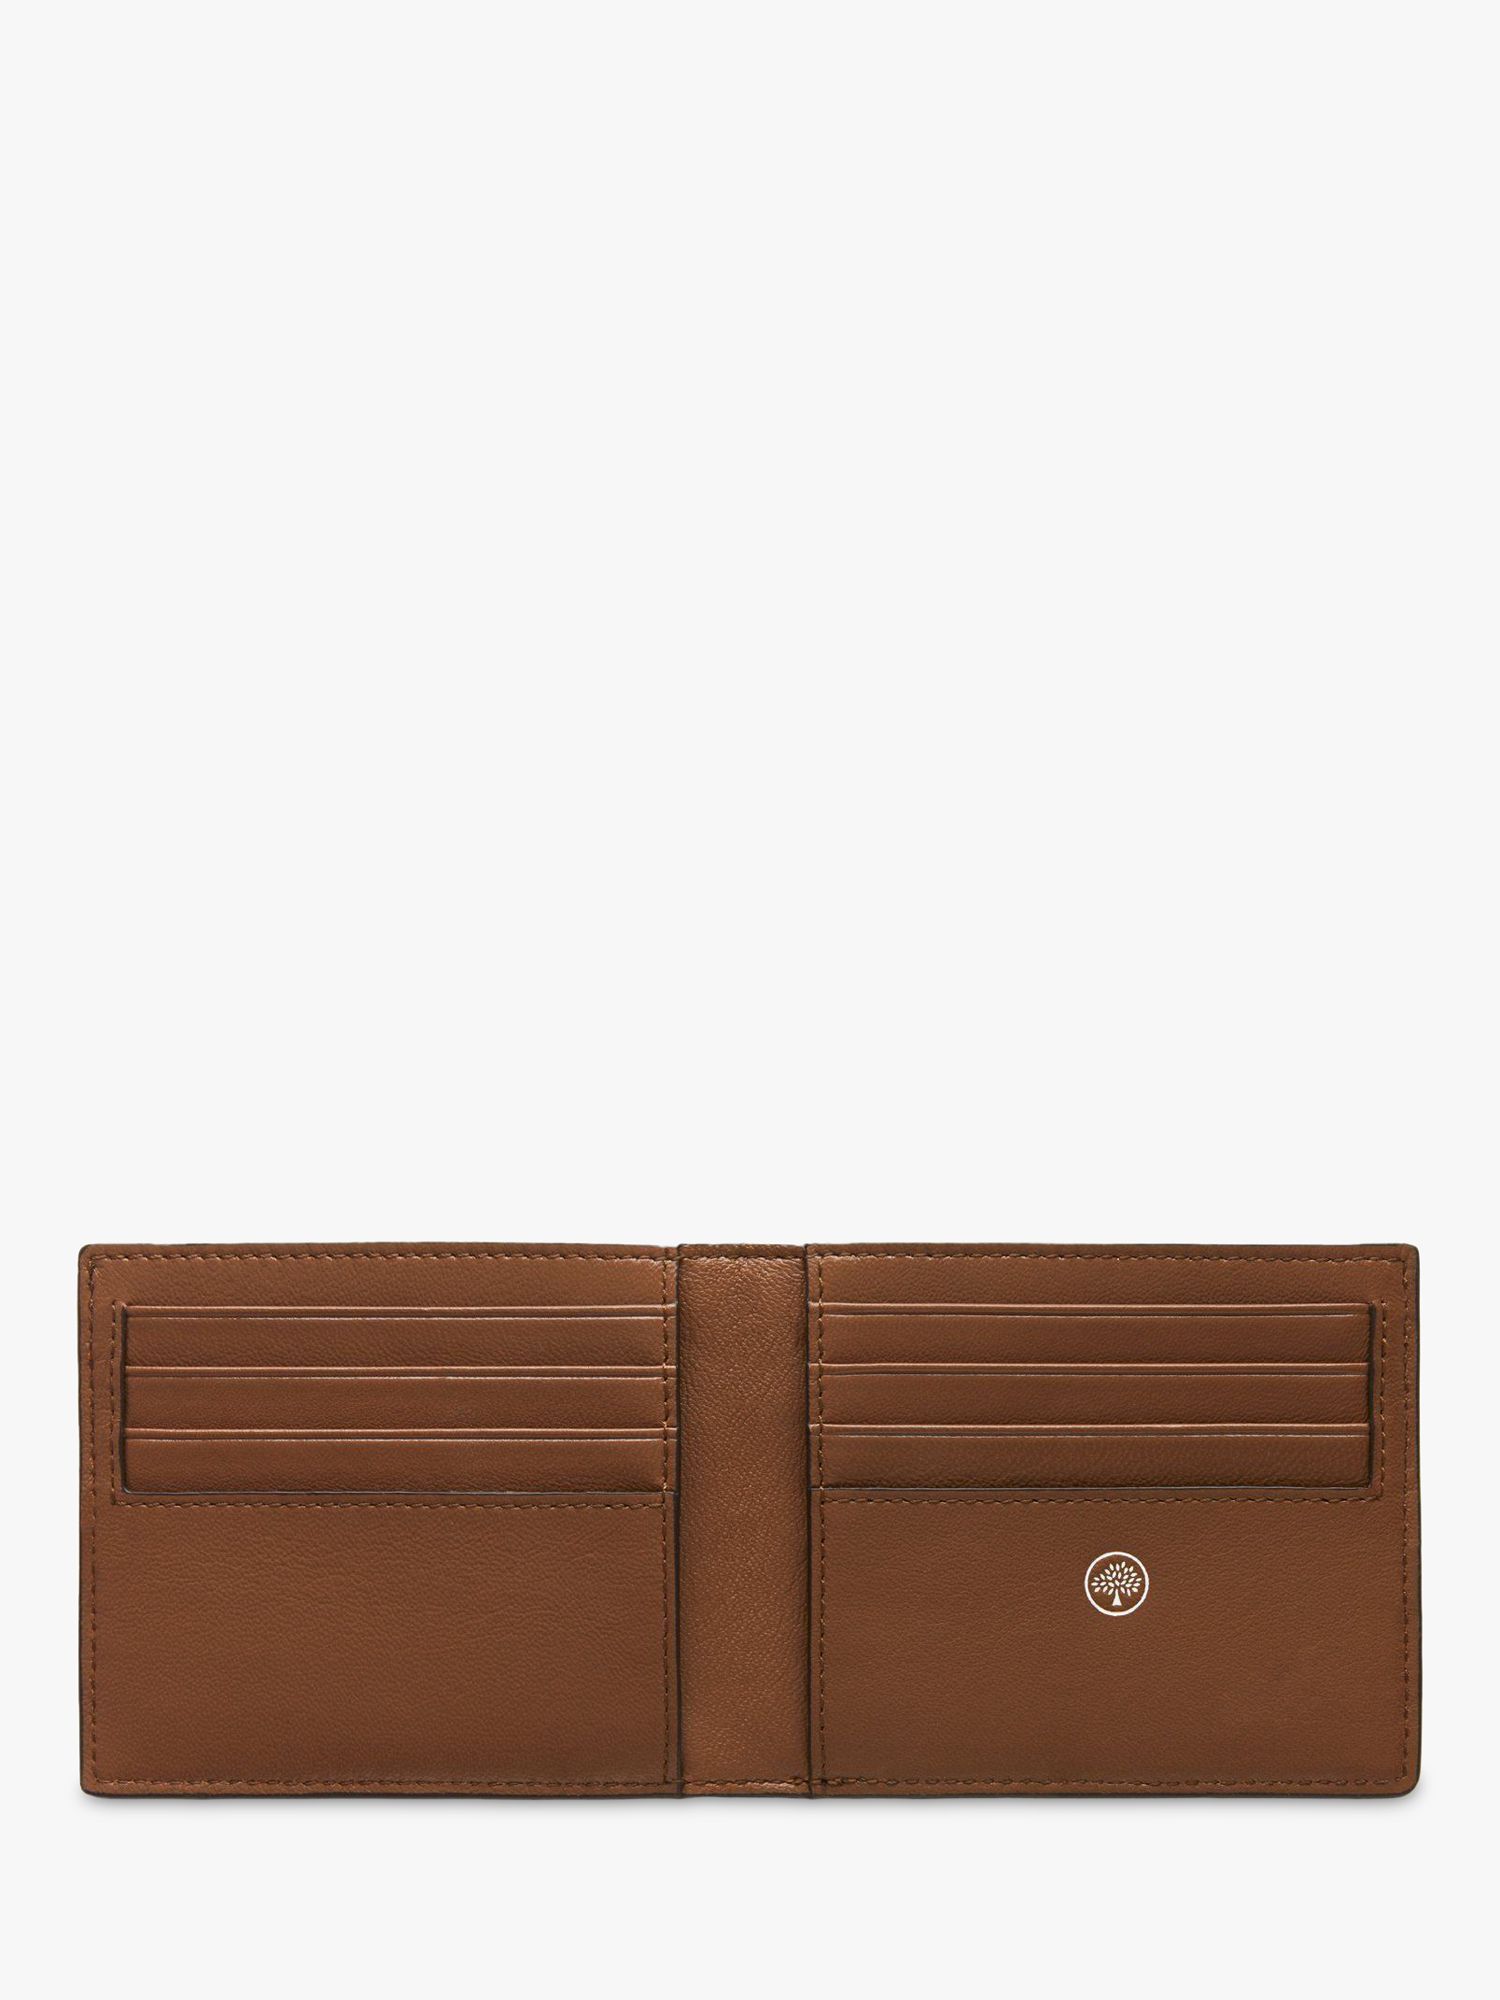 Buy Mulberry Eight Card Small Classic Grain Leather Wallet Online at johnlewis.com